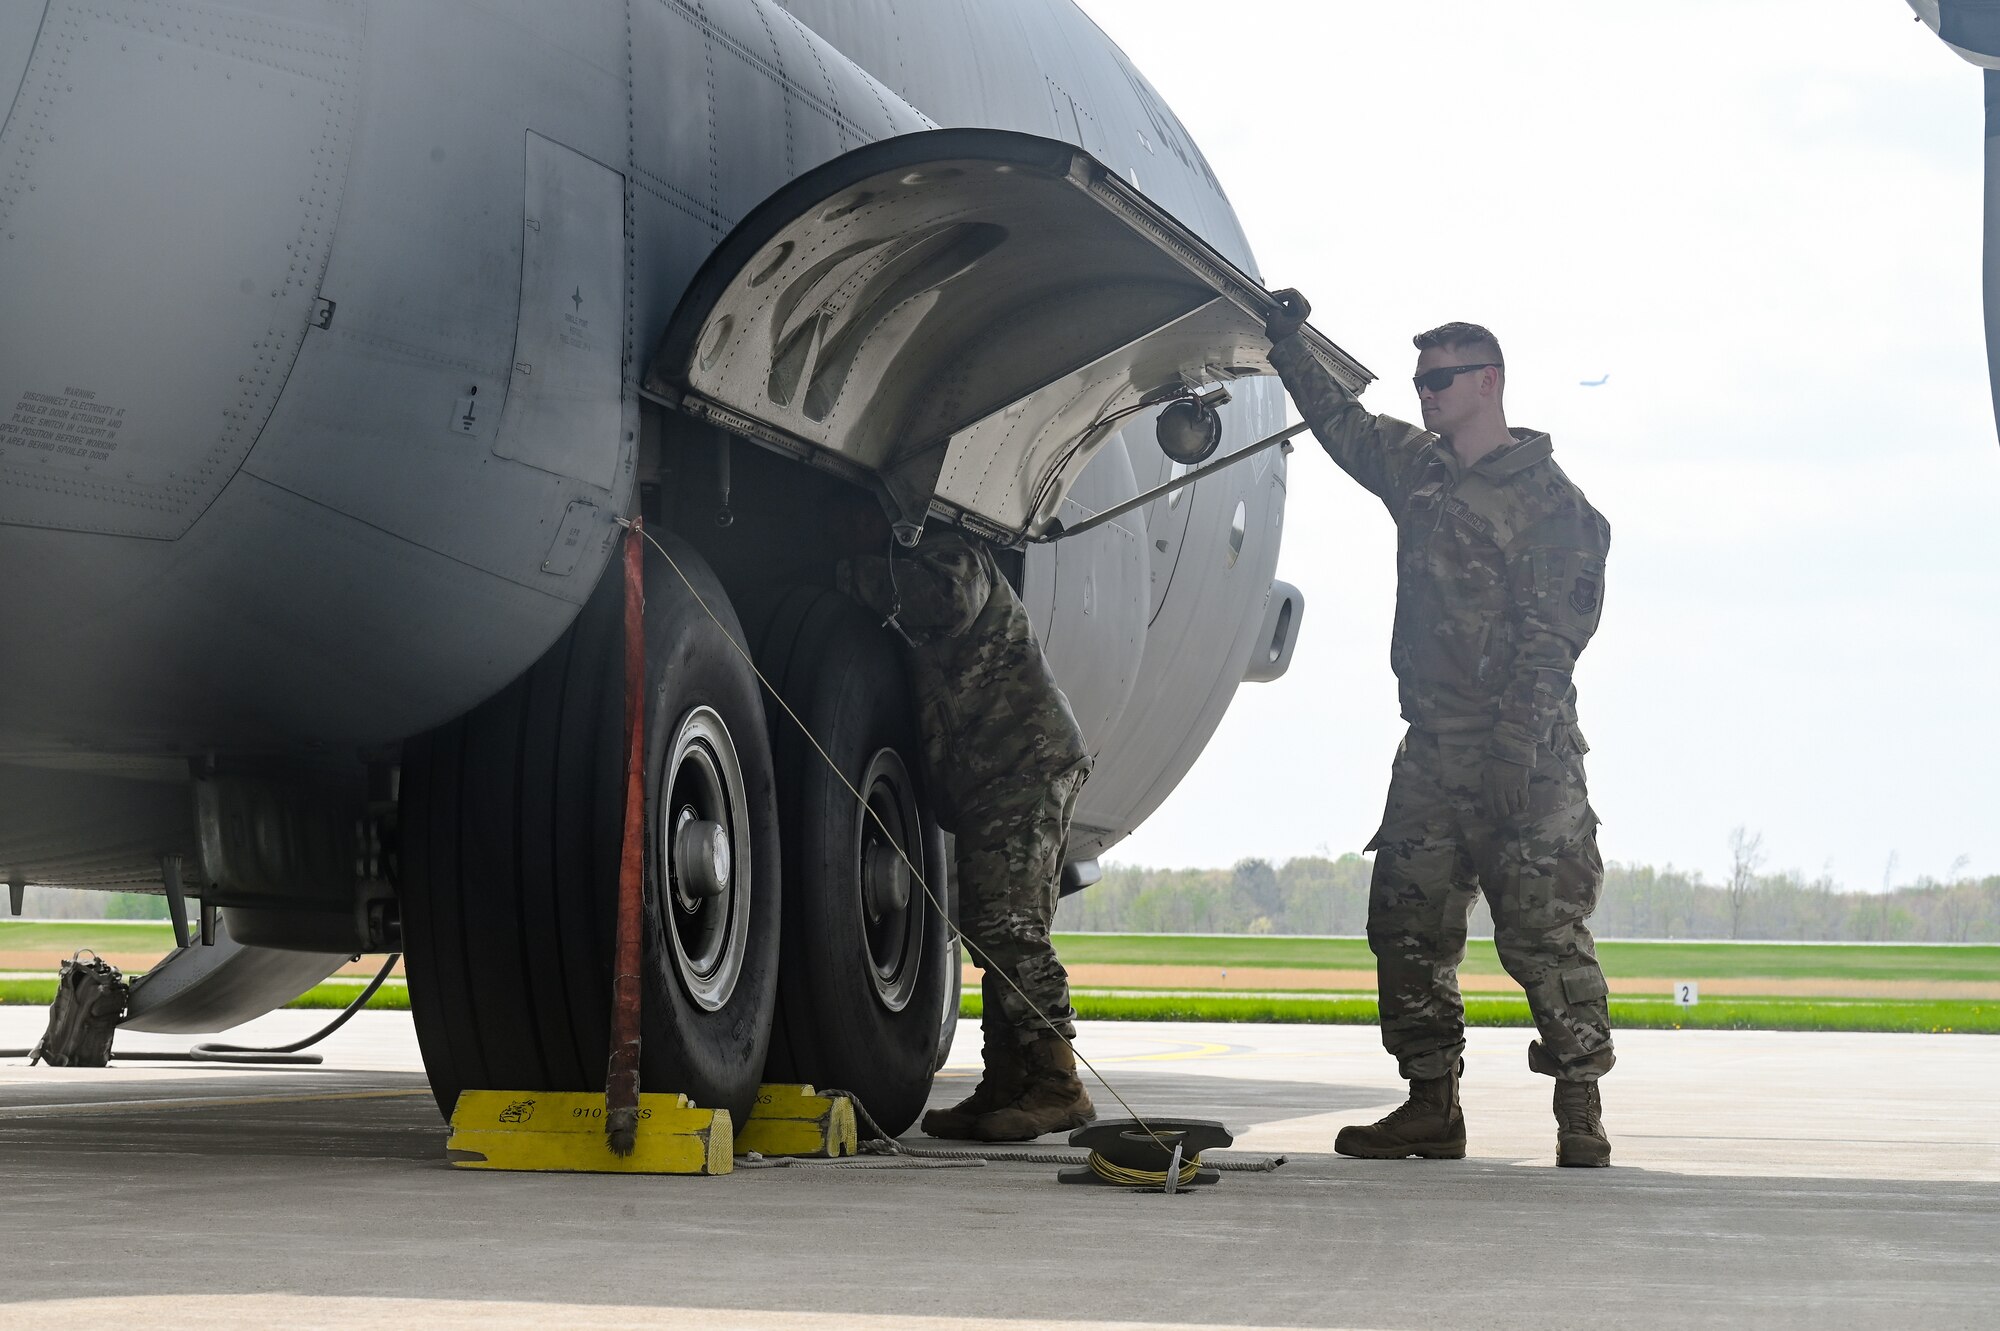 Tech. Sgts. Dale Burns and Taylor Webber, both aerospace maintenance specialists assigned to the 910th Maintenance Group, perform post-flight maintenance checks on a C-130H Hercules aircraft on April 25, 2023, at Youngstown Air Reserve Station, Ohio.